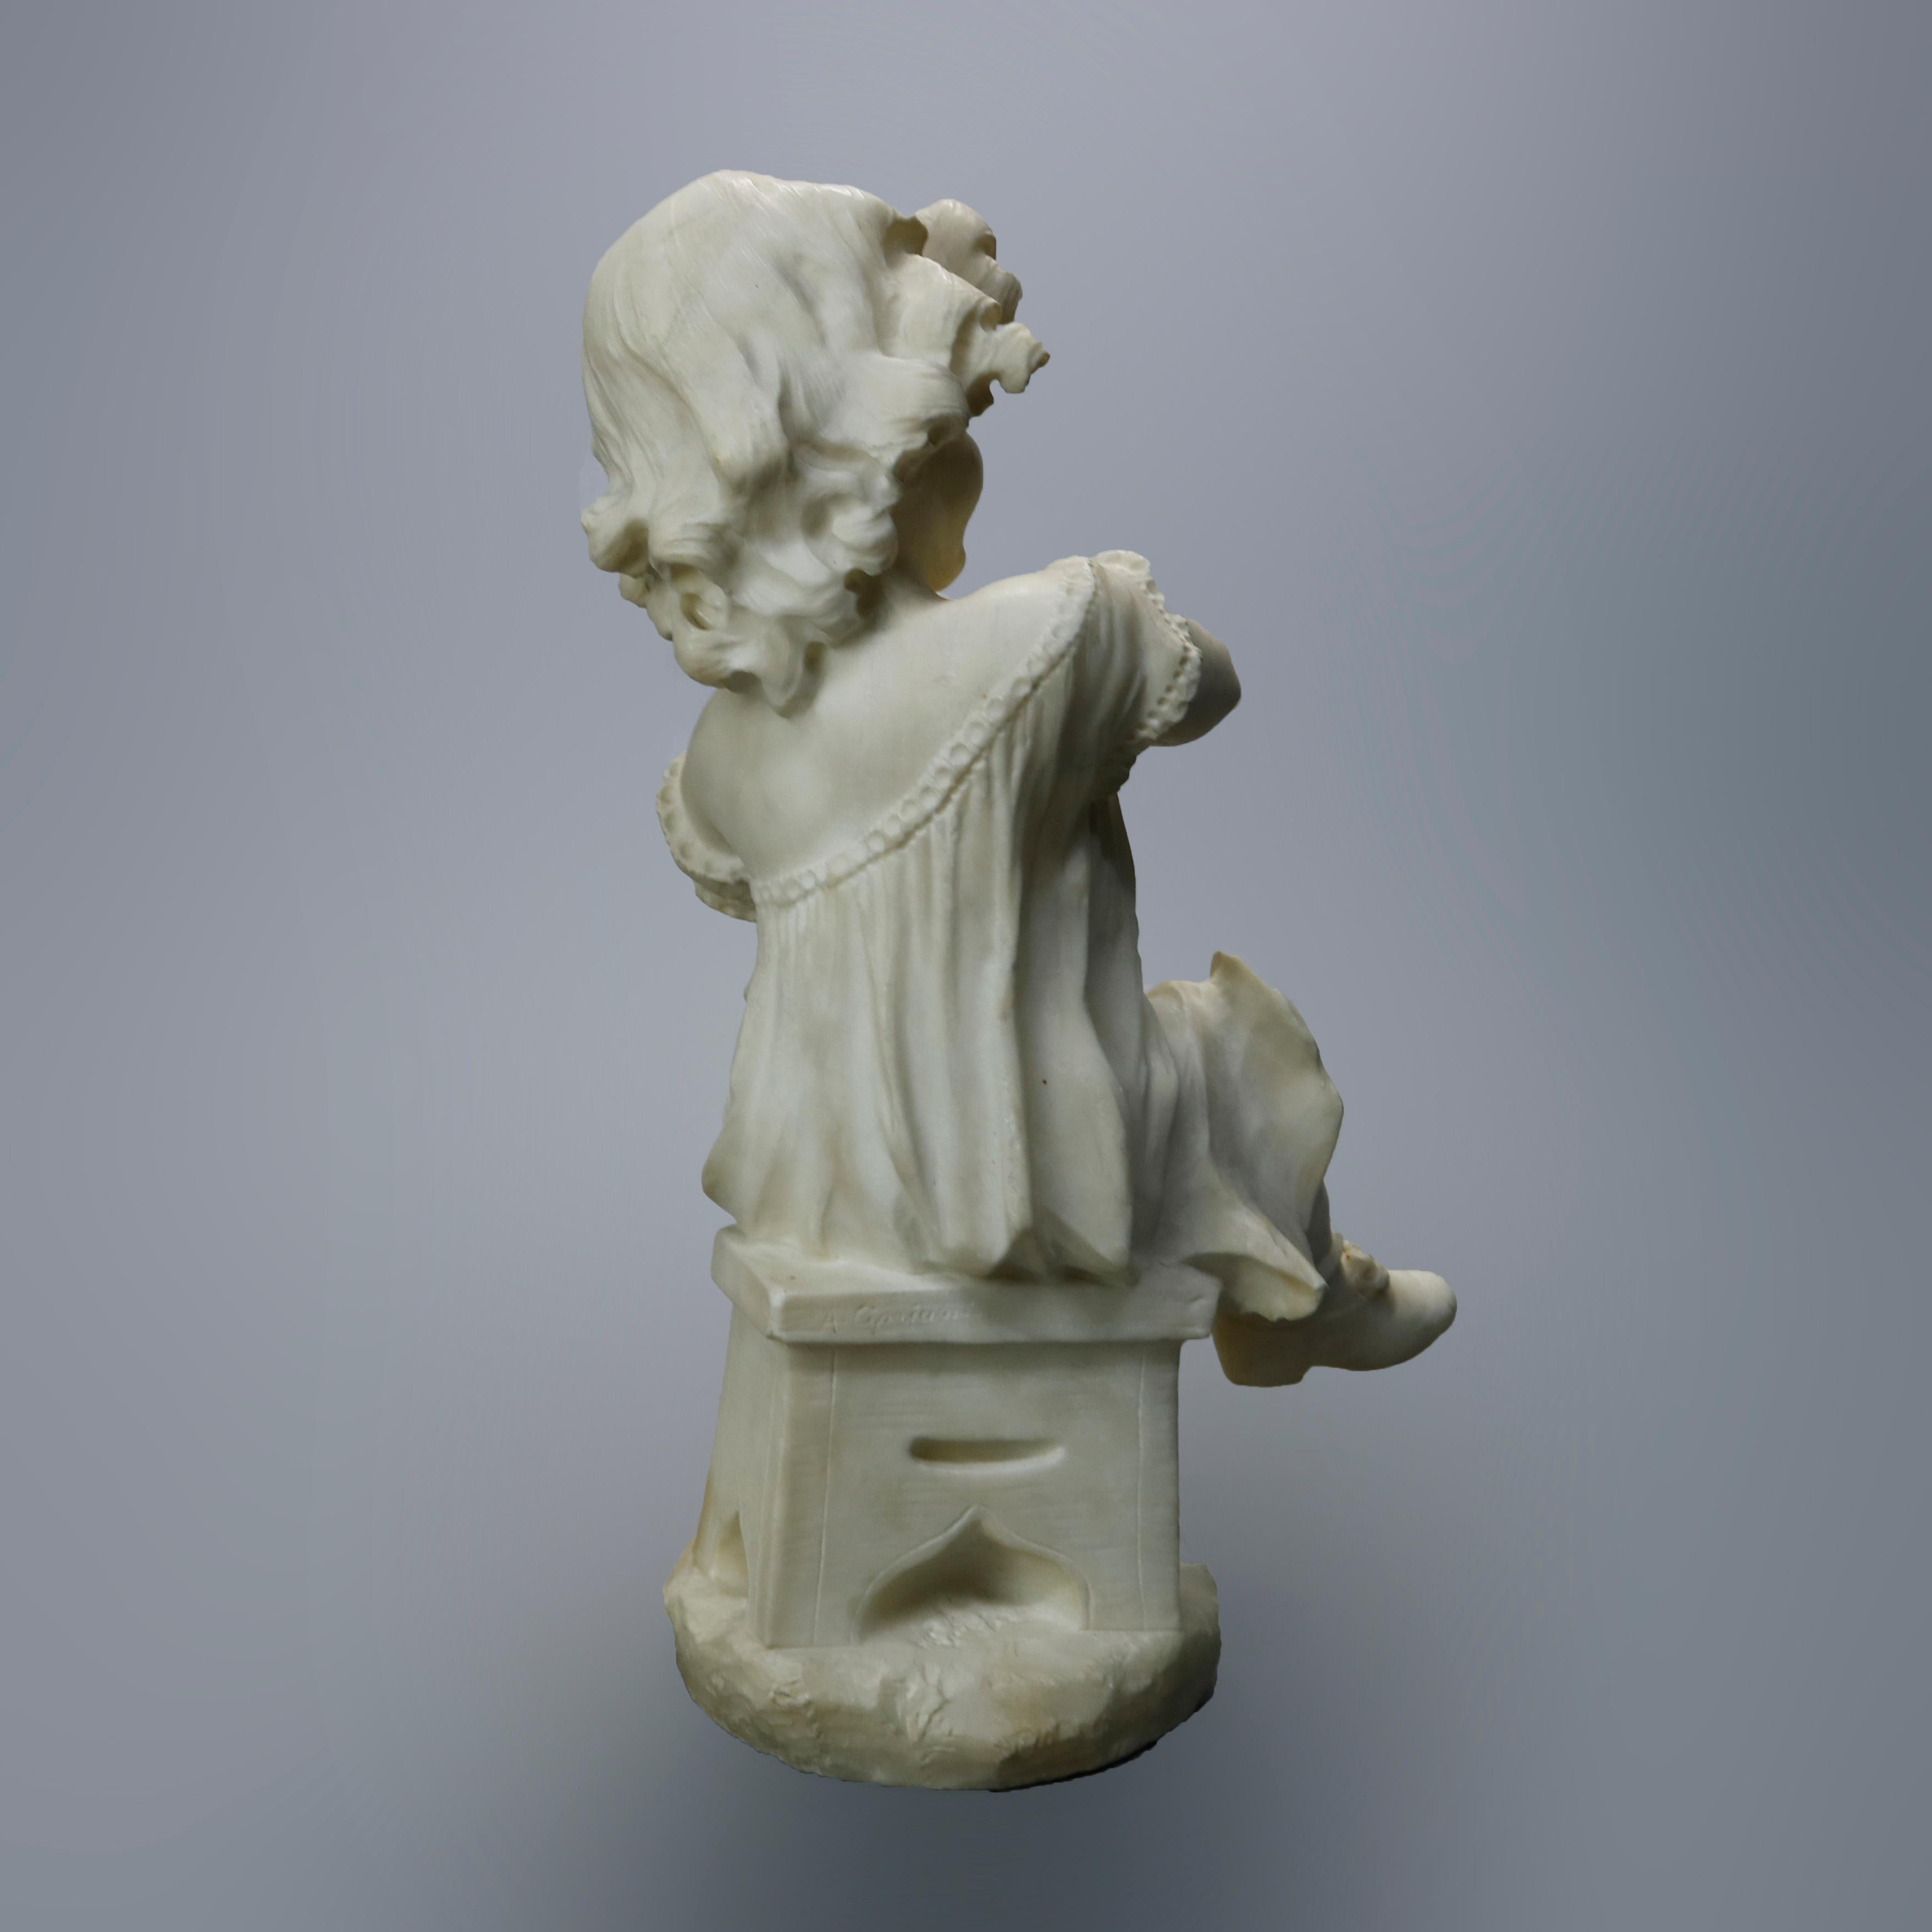 Antique Carved Alabaster Sculpture of Young Girl by Adolpho Cipriani, c1890 8